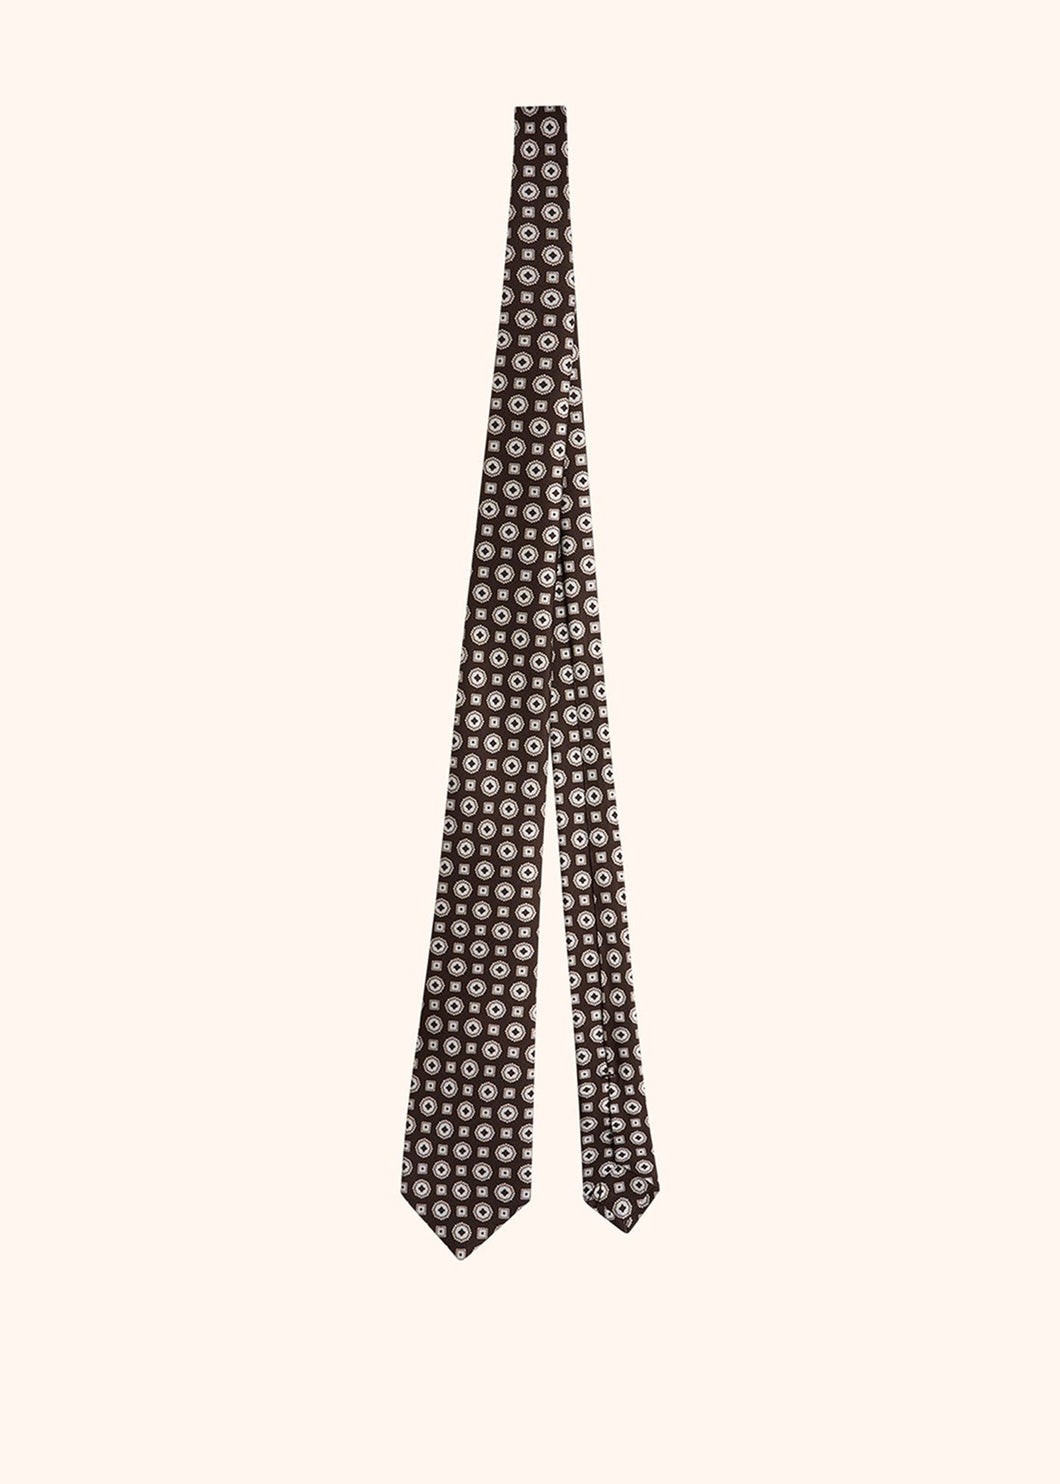 Kiton brown and white medallion design tie for man, made of silk